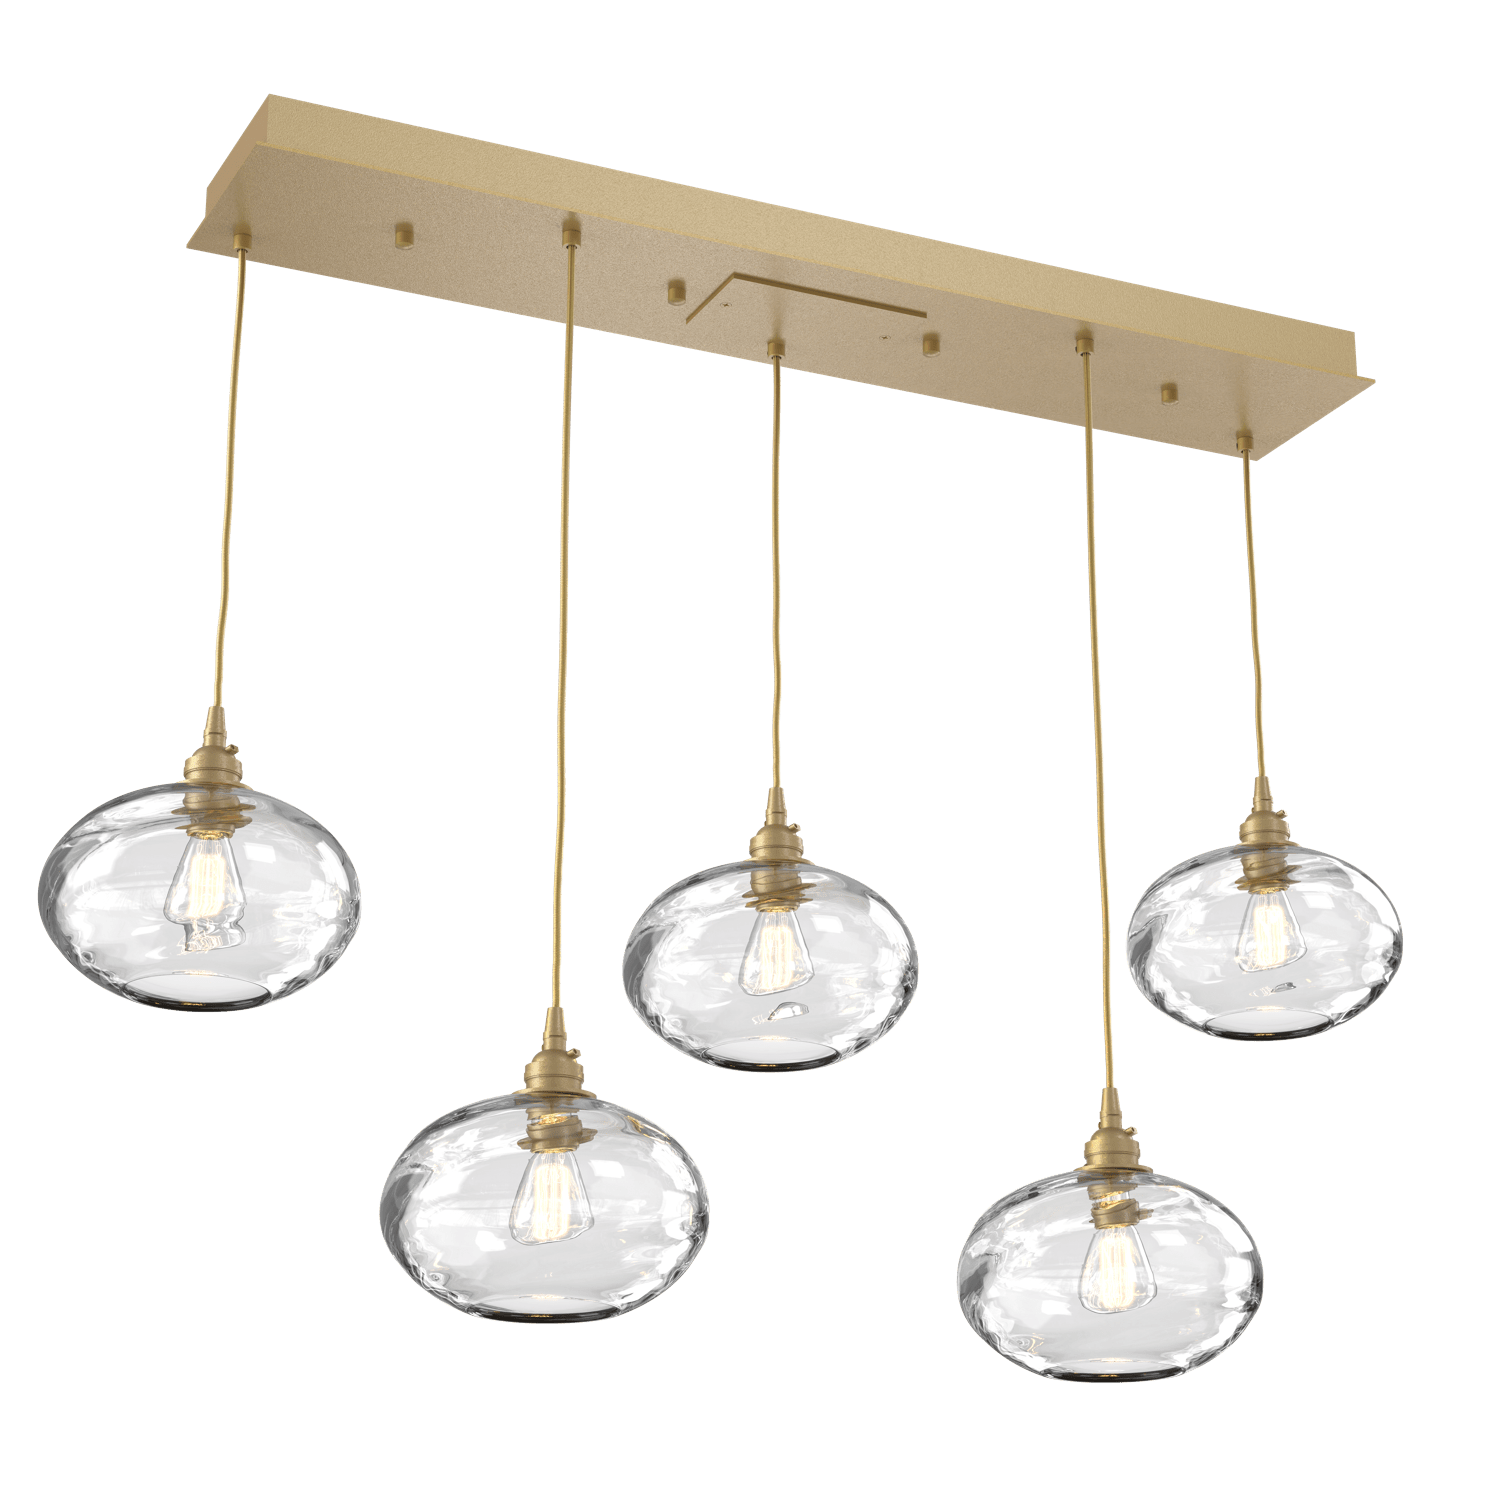 PLB0036-05-GB-OC-Hammerton-Studio-Optic-Blown-Glass-Coppa-5-light-linear-pendant-chandelier-with-gilded-brass-finish-and-optic-clear-blown-glass-shades-and-incandescent-lamping